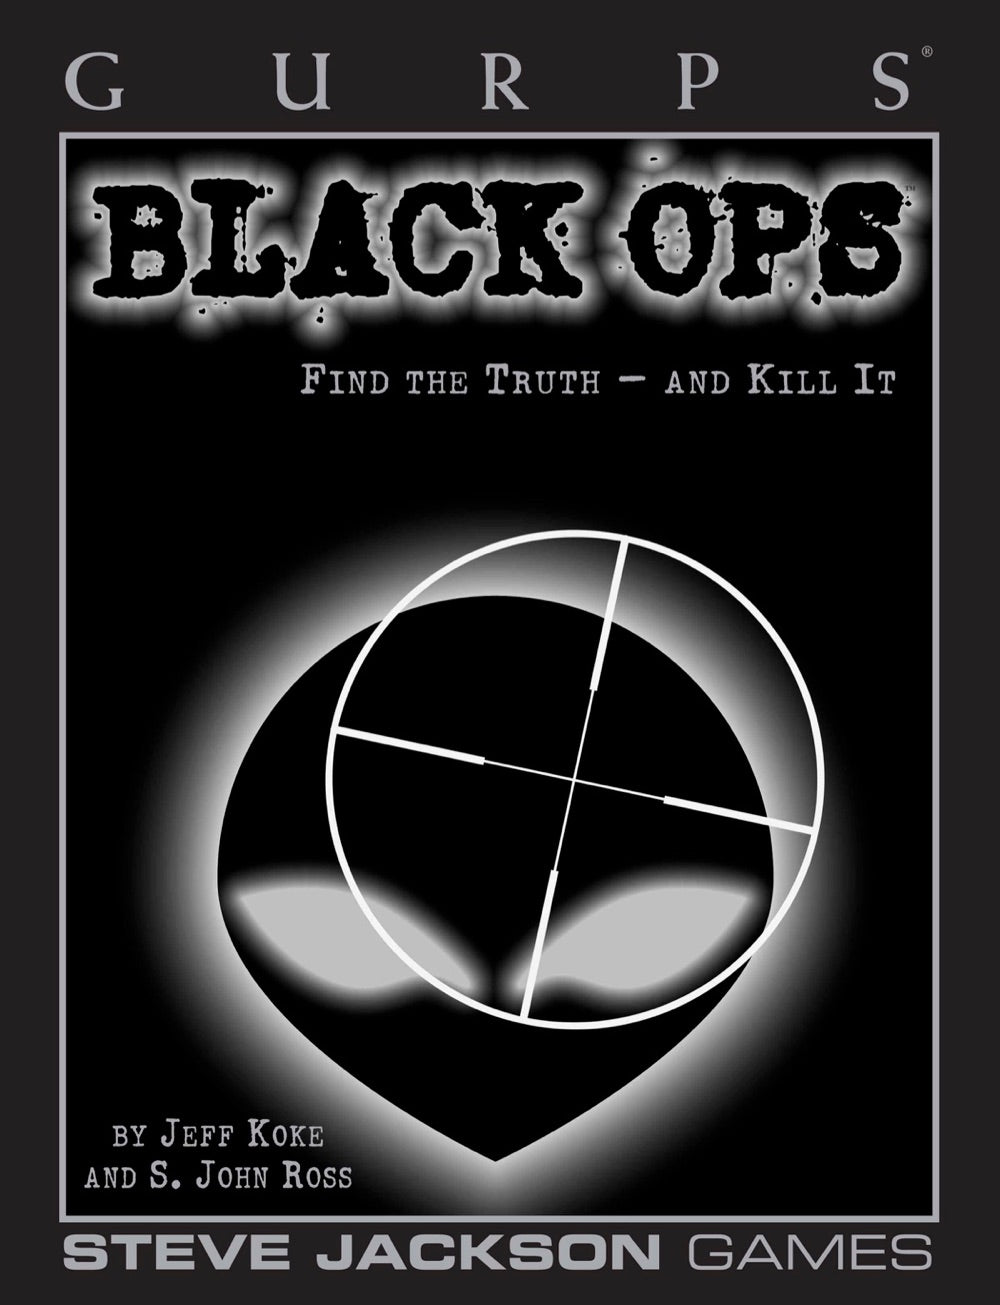 GURPS Classic: Black Ops